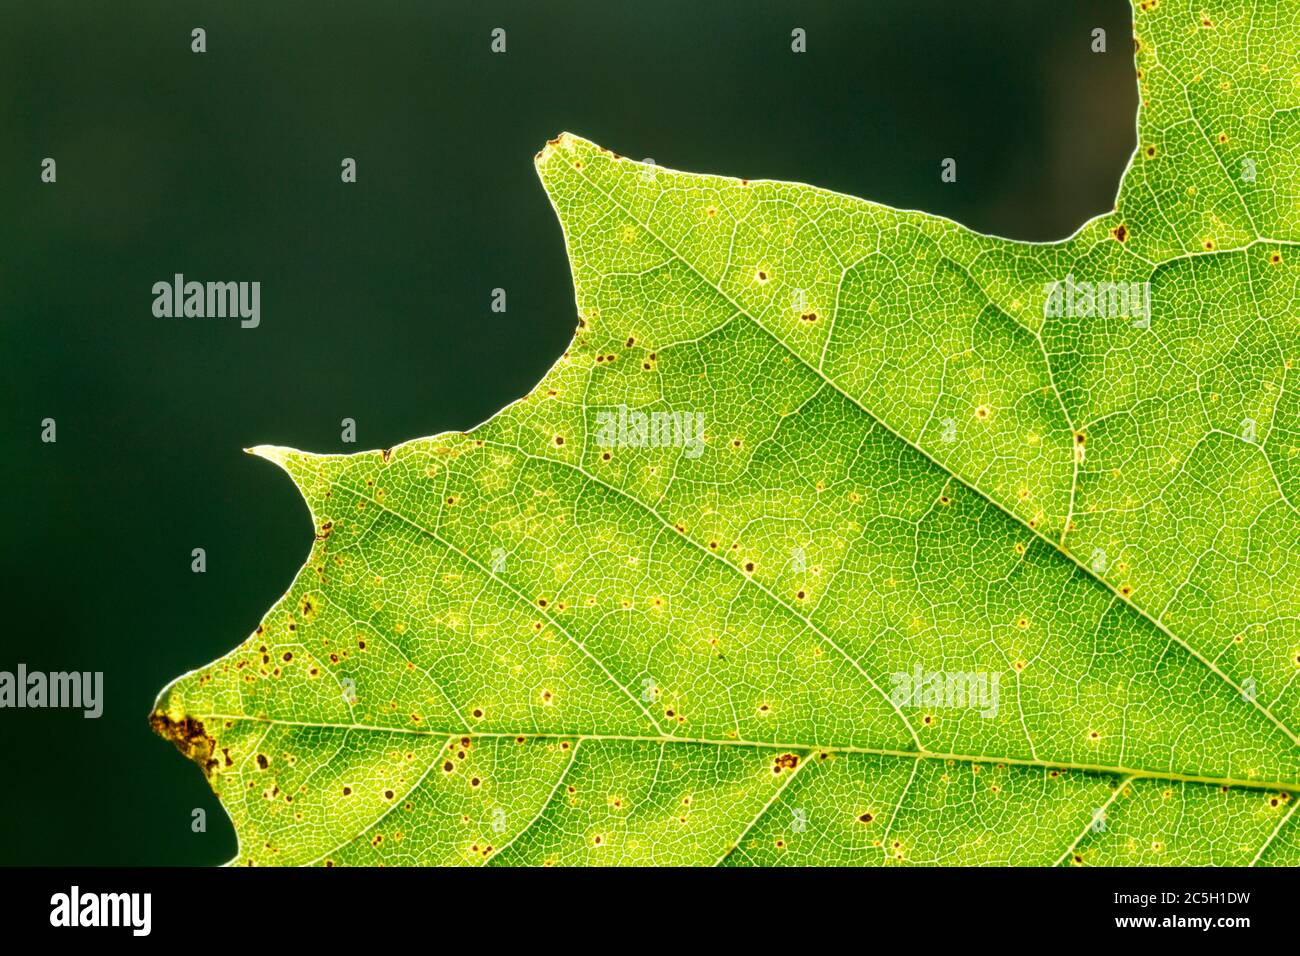 Close up detailed view of a sycamore tree (Acer pseudoplatanus) leaf showing veins, saw-teeth edge and cell structure Stock Photo